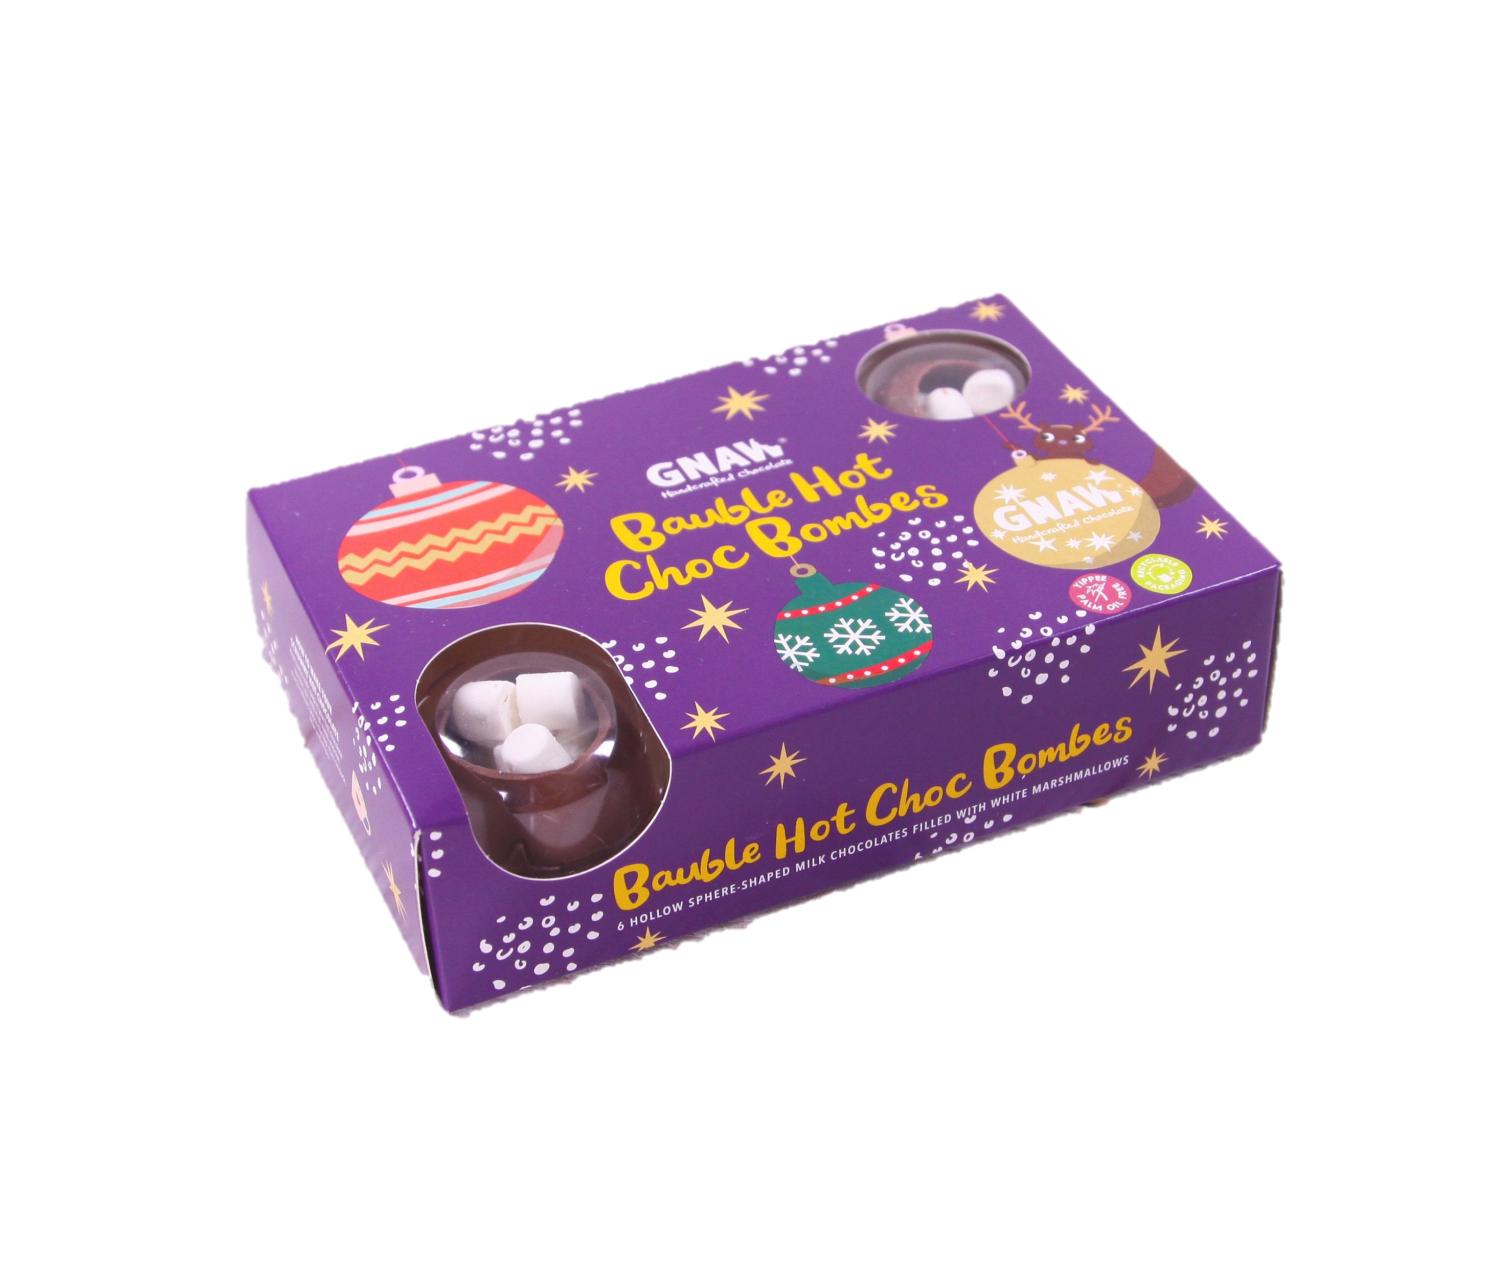 GNAW Bauble bombes 156g